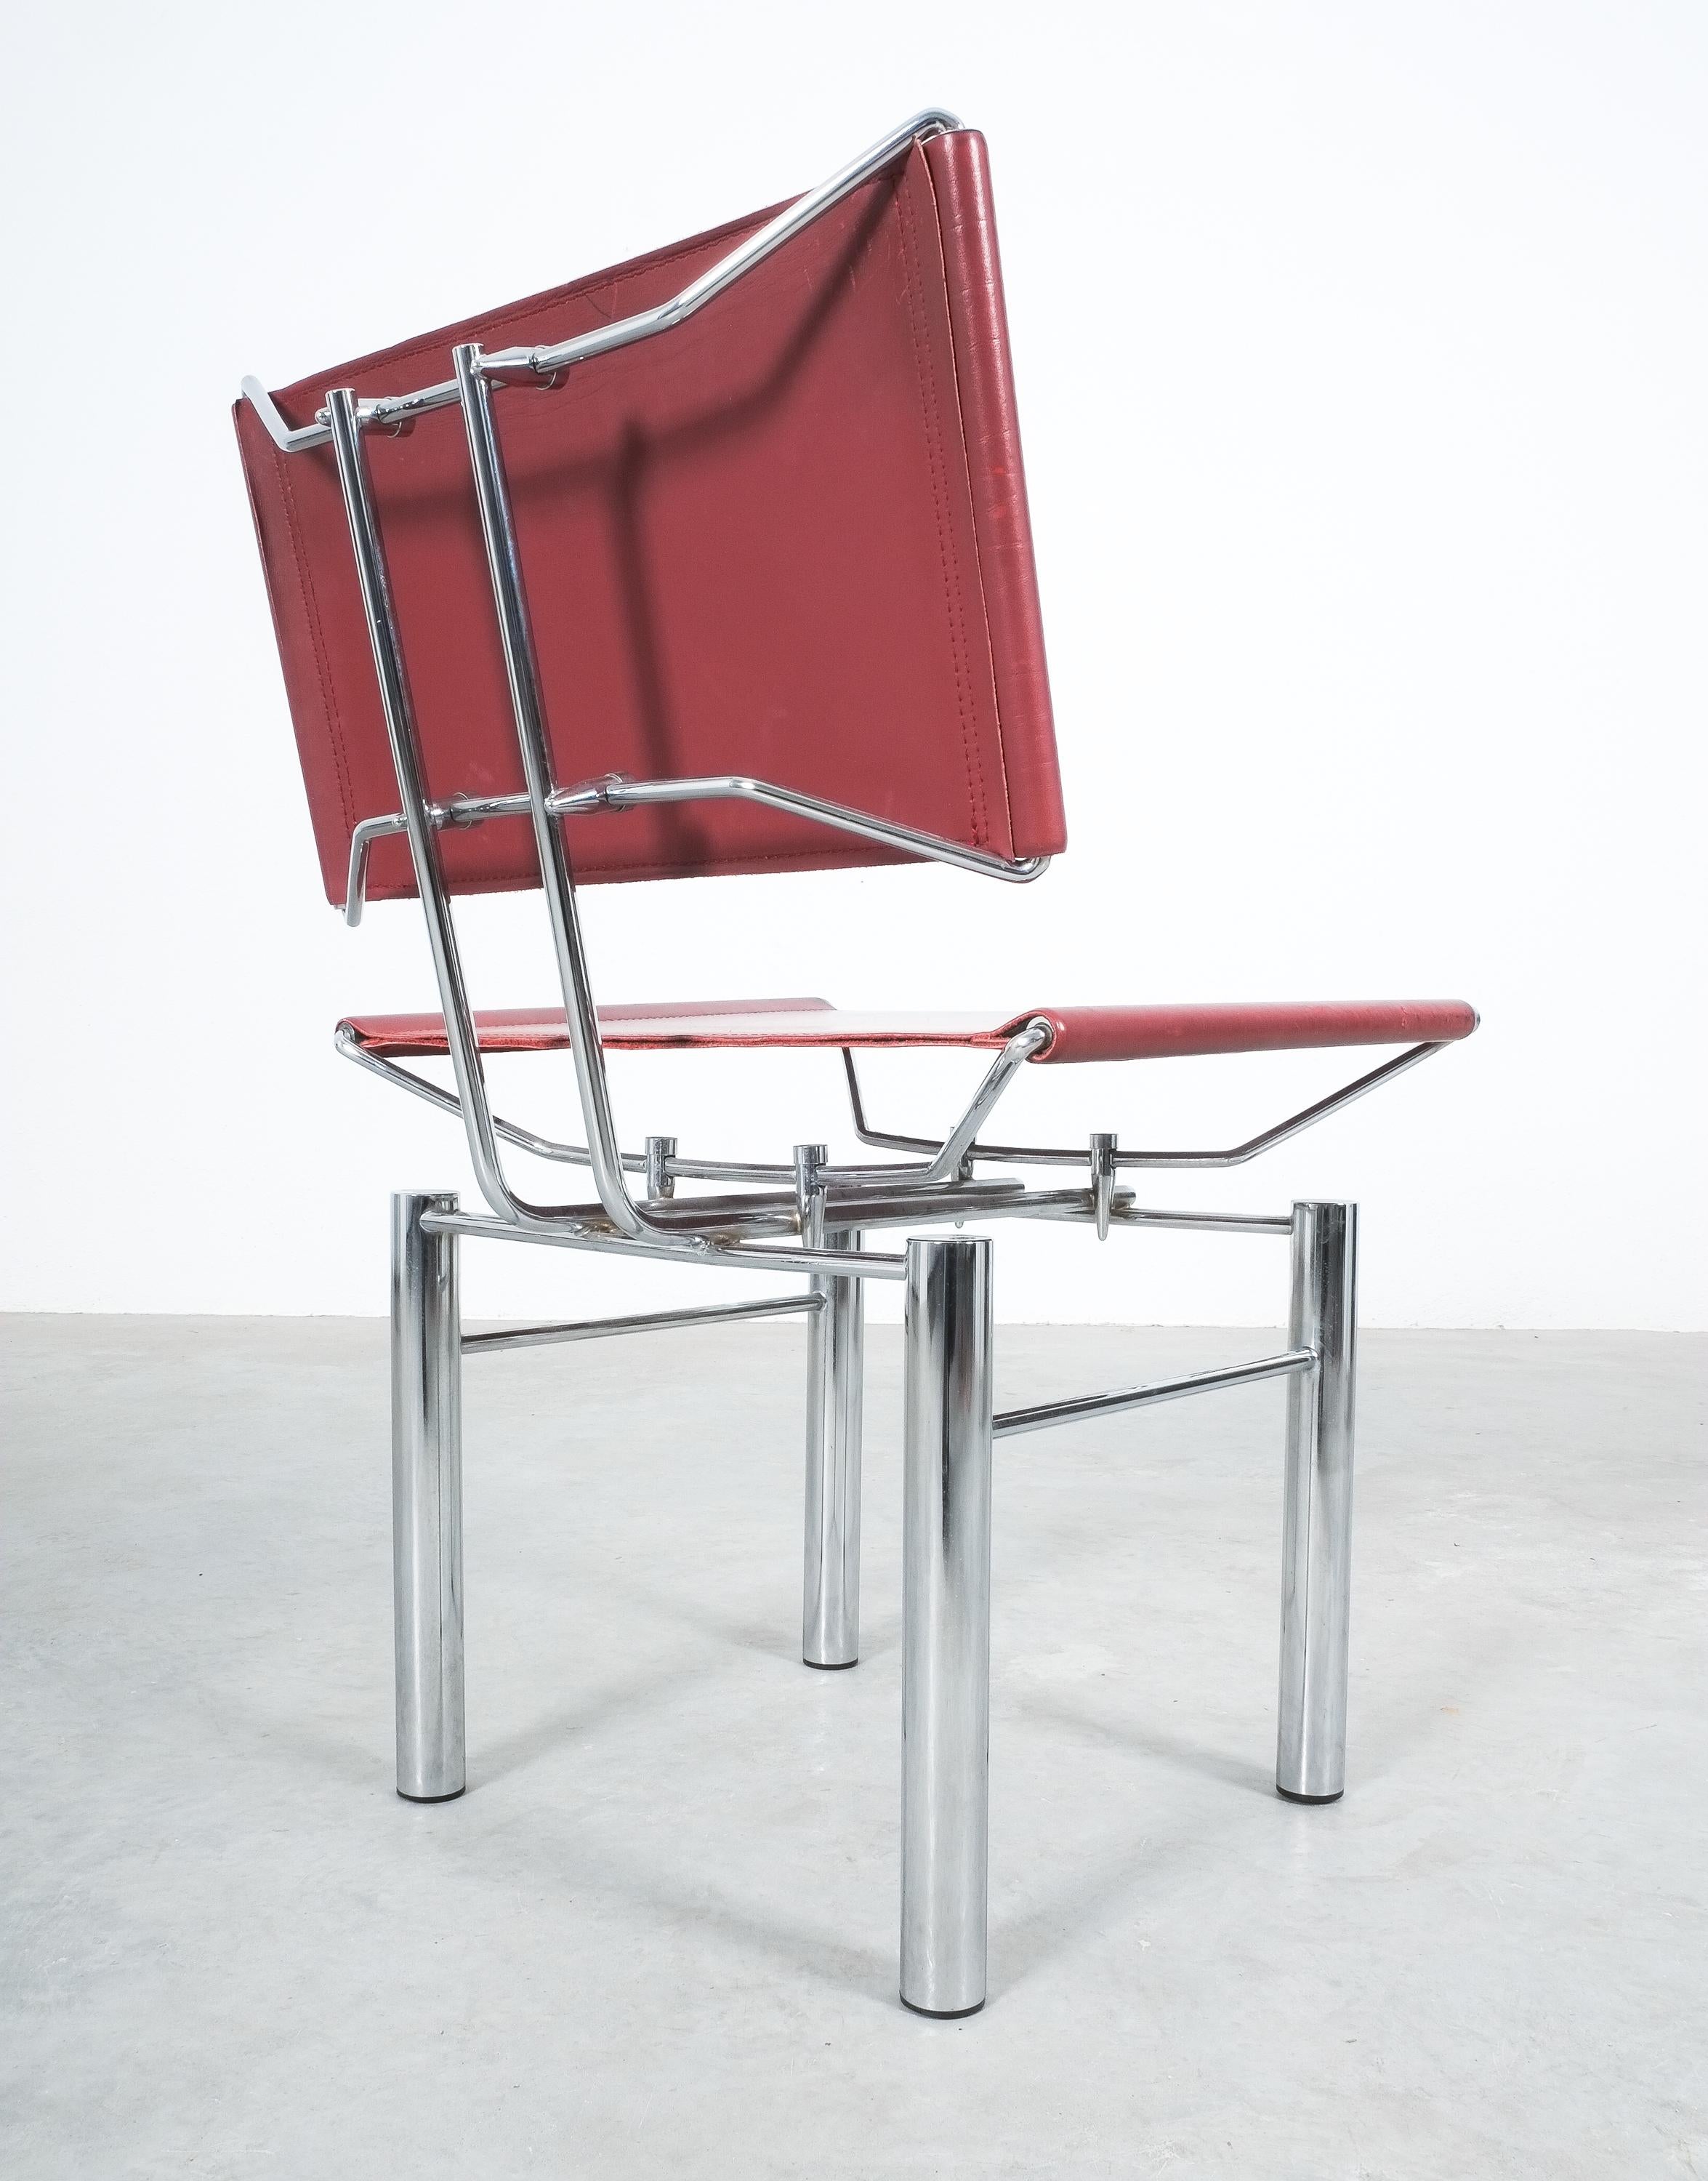 Hans Ullrich Bitsch Chairs Set of 6 Red Leather Chrome Metal Series 8600, 1980 For Sale 2